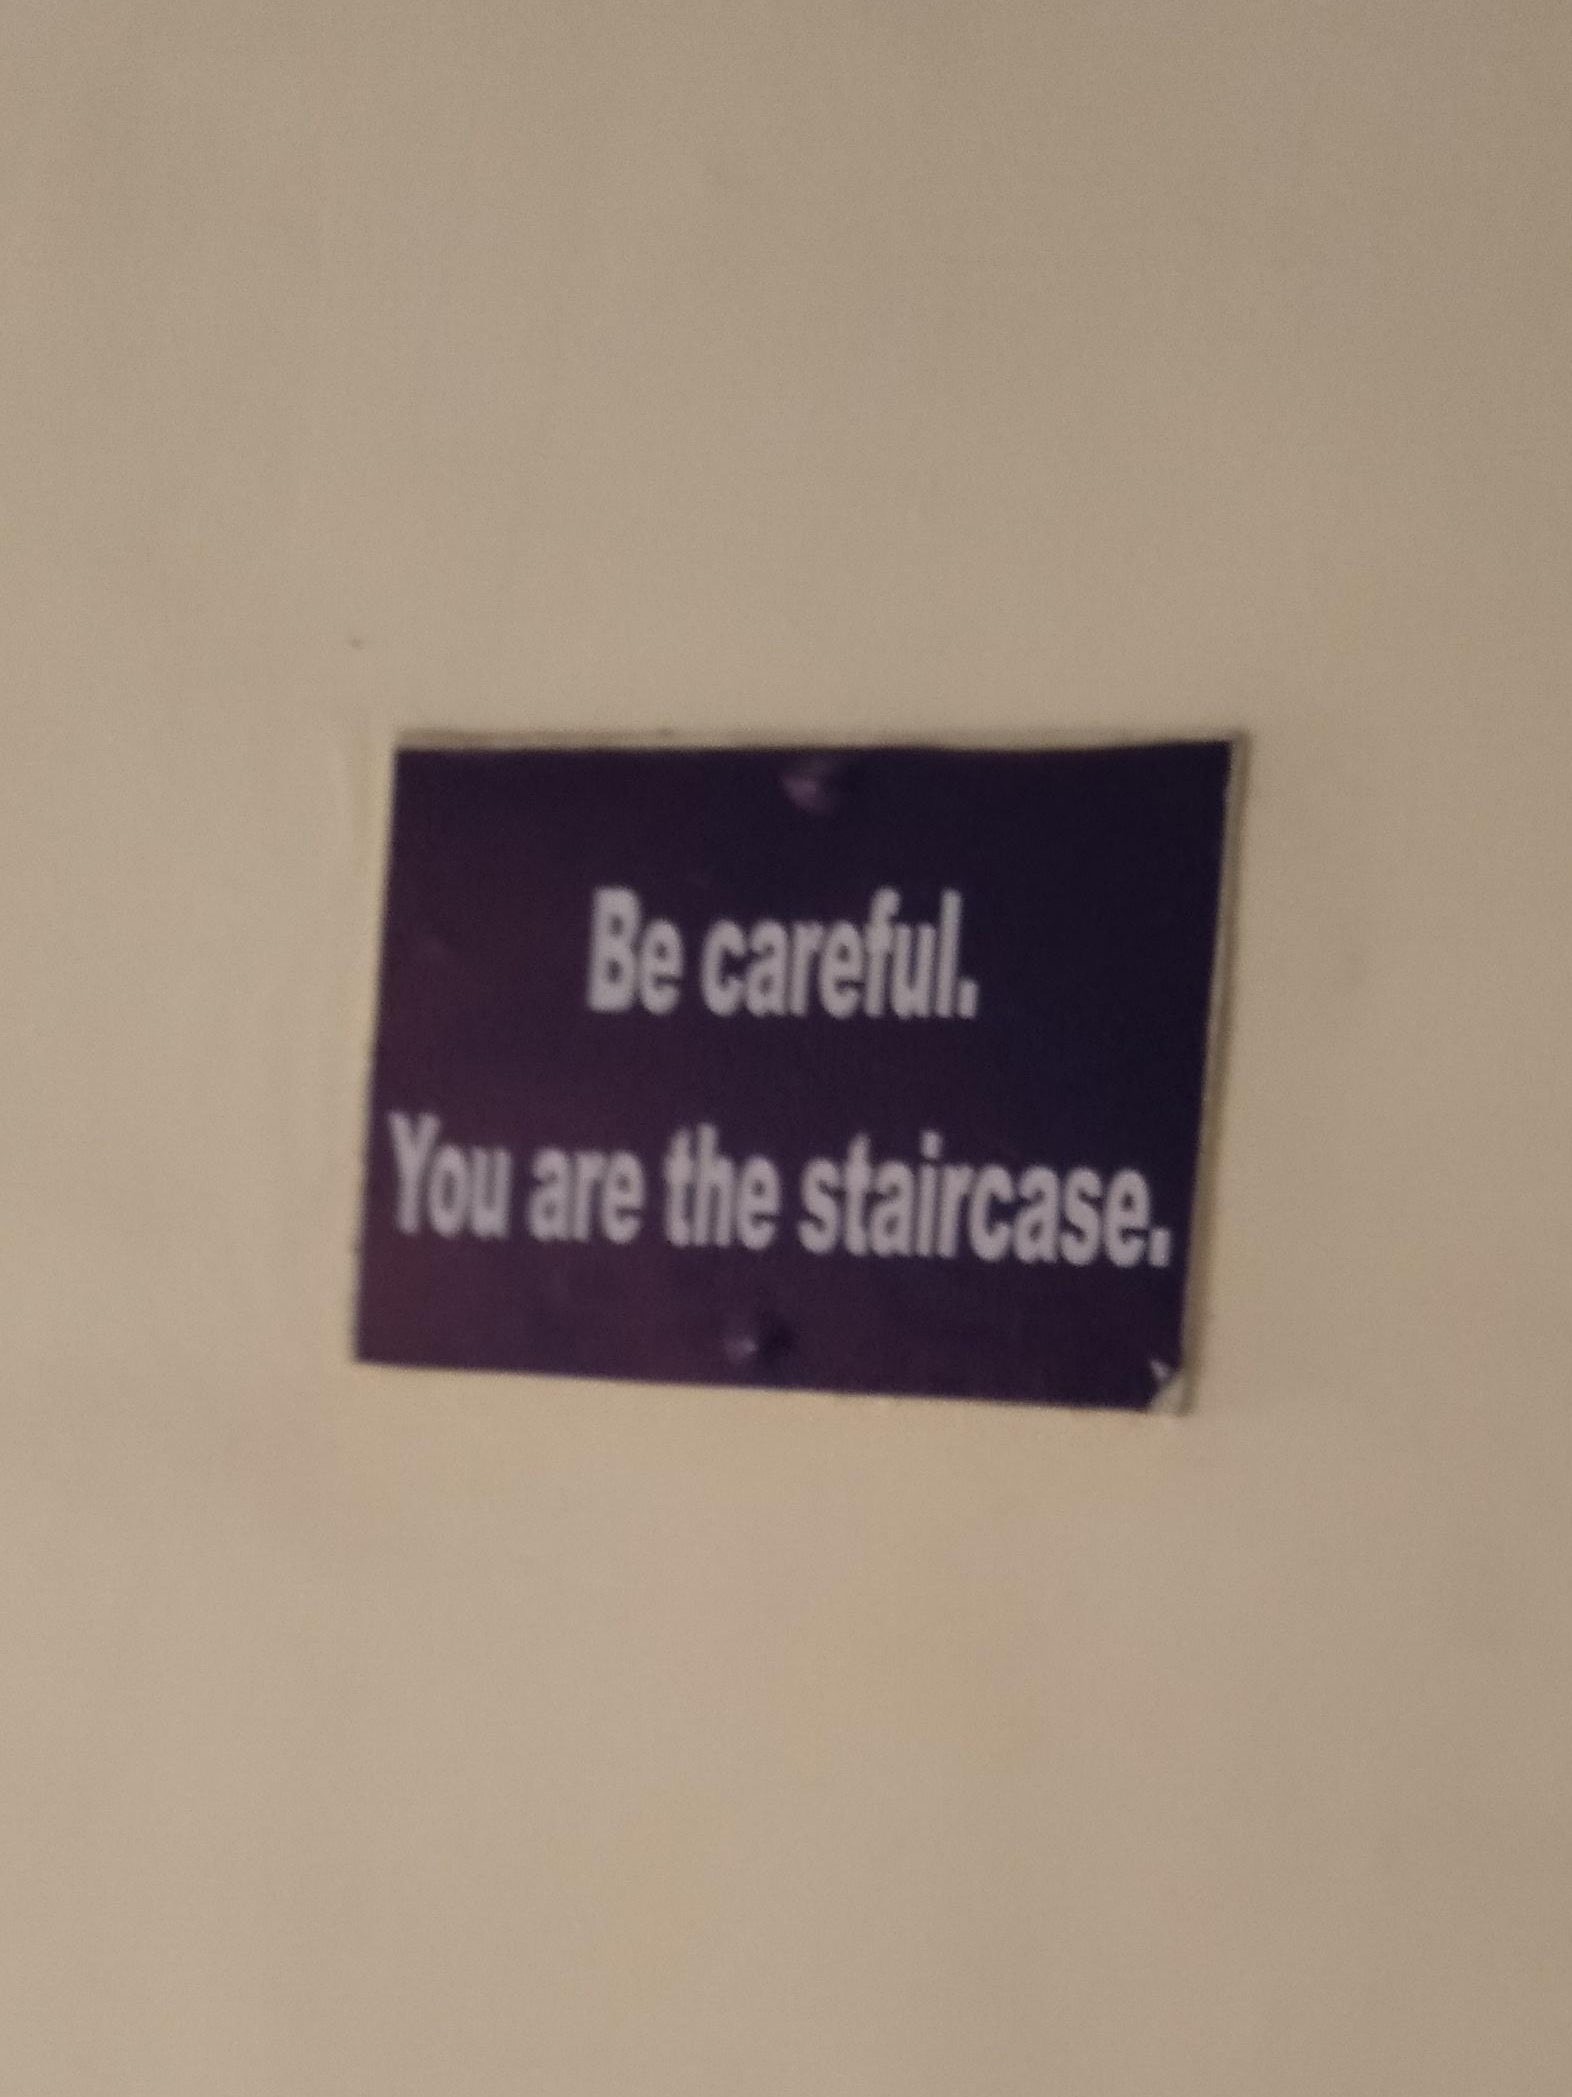 label - Be careful. You are the staircase.